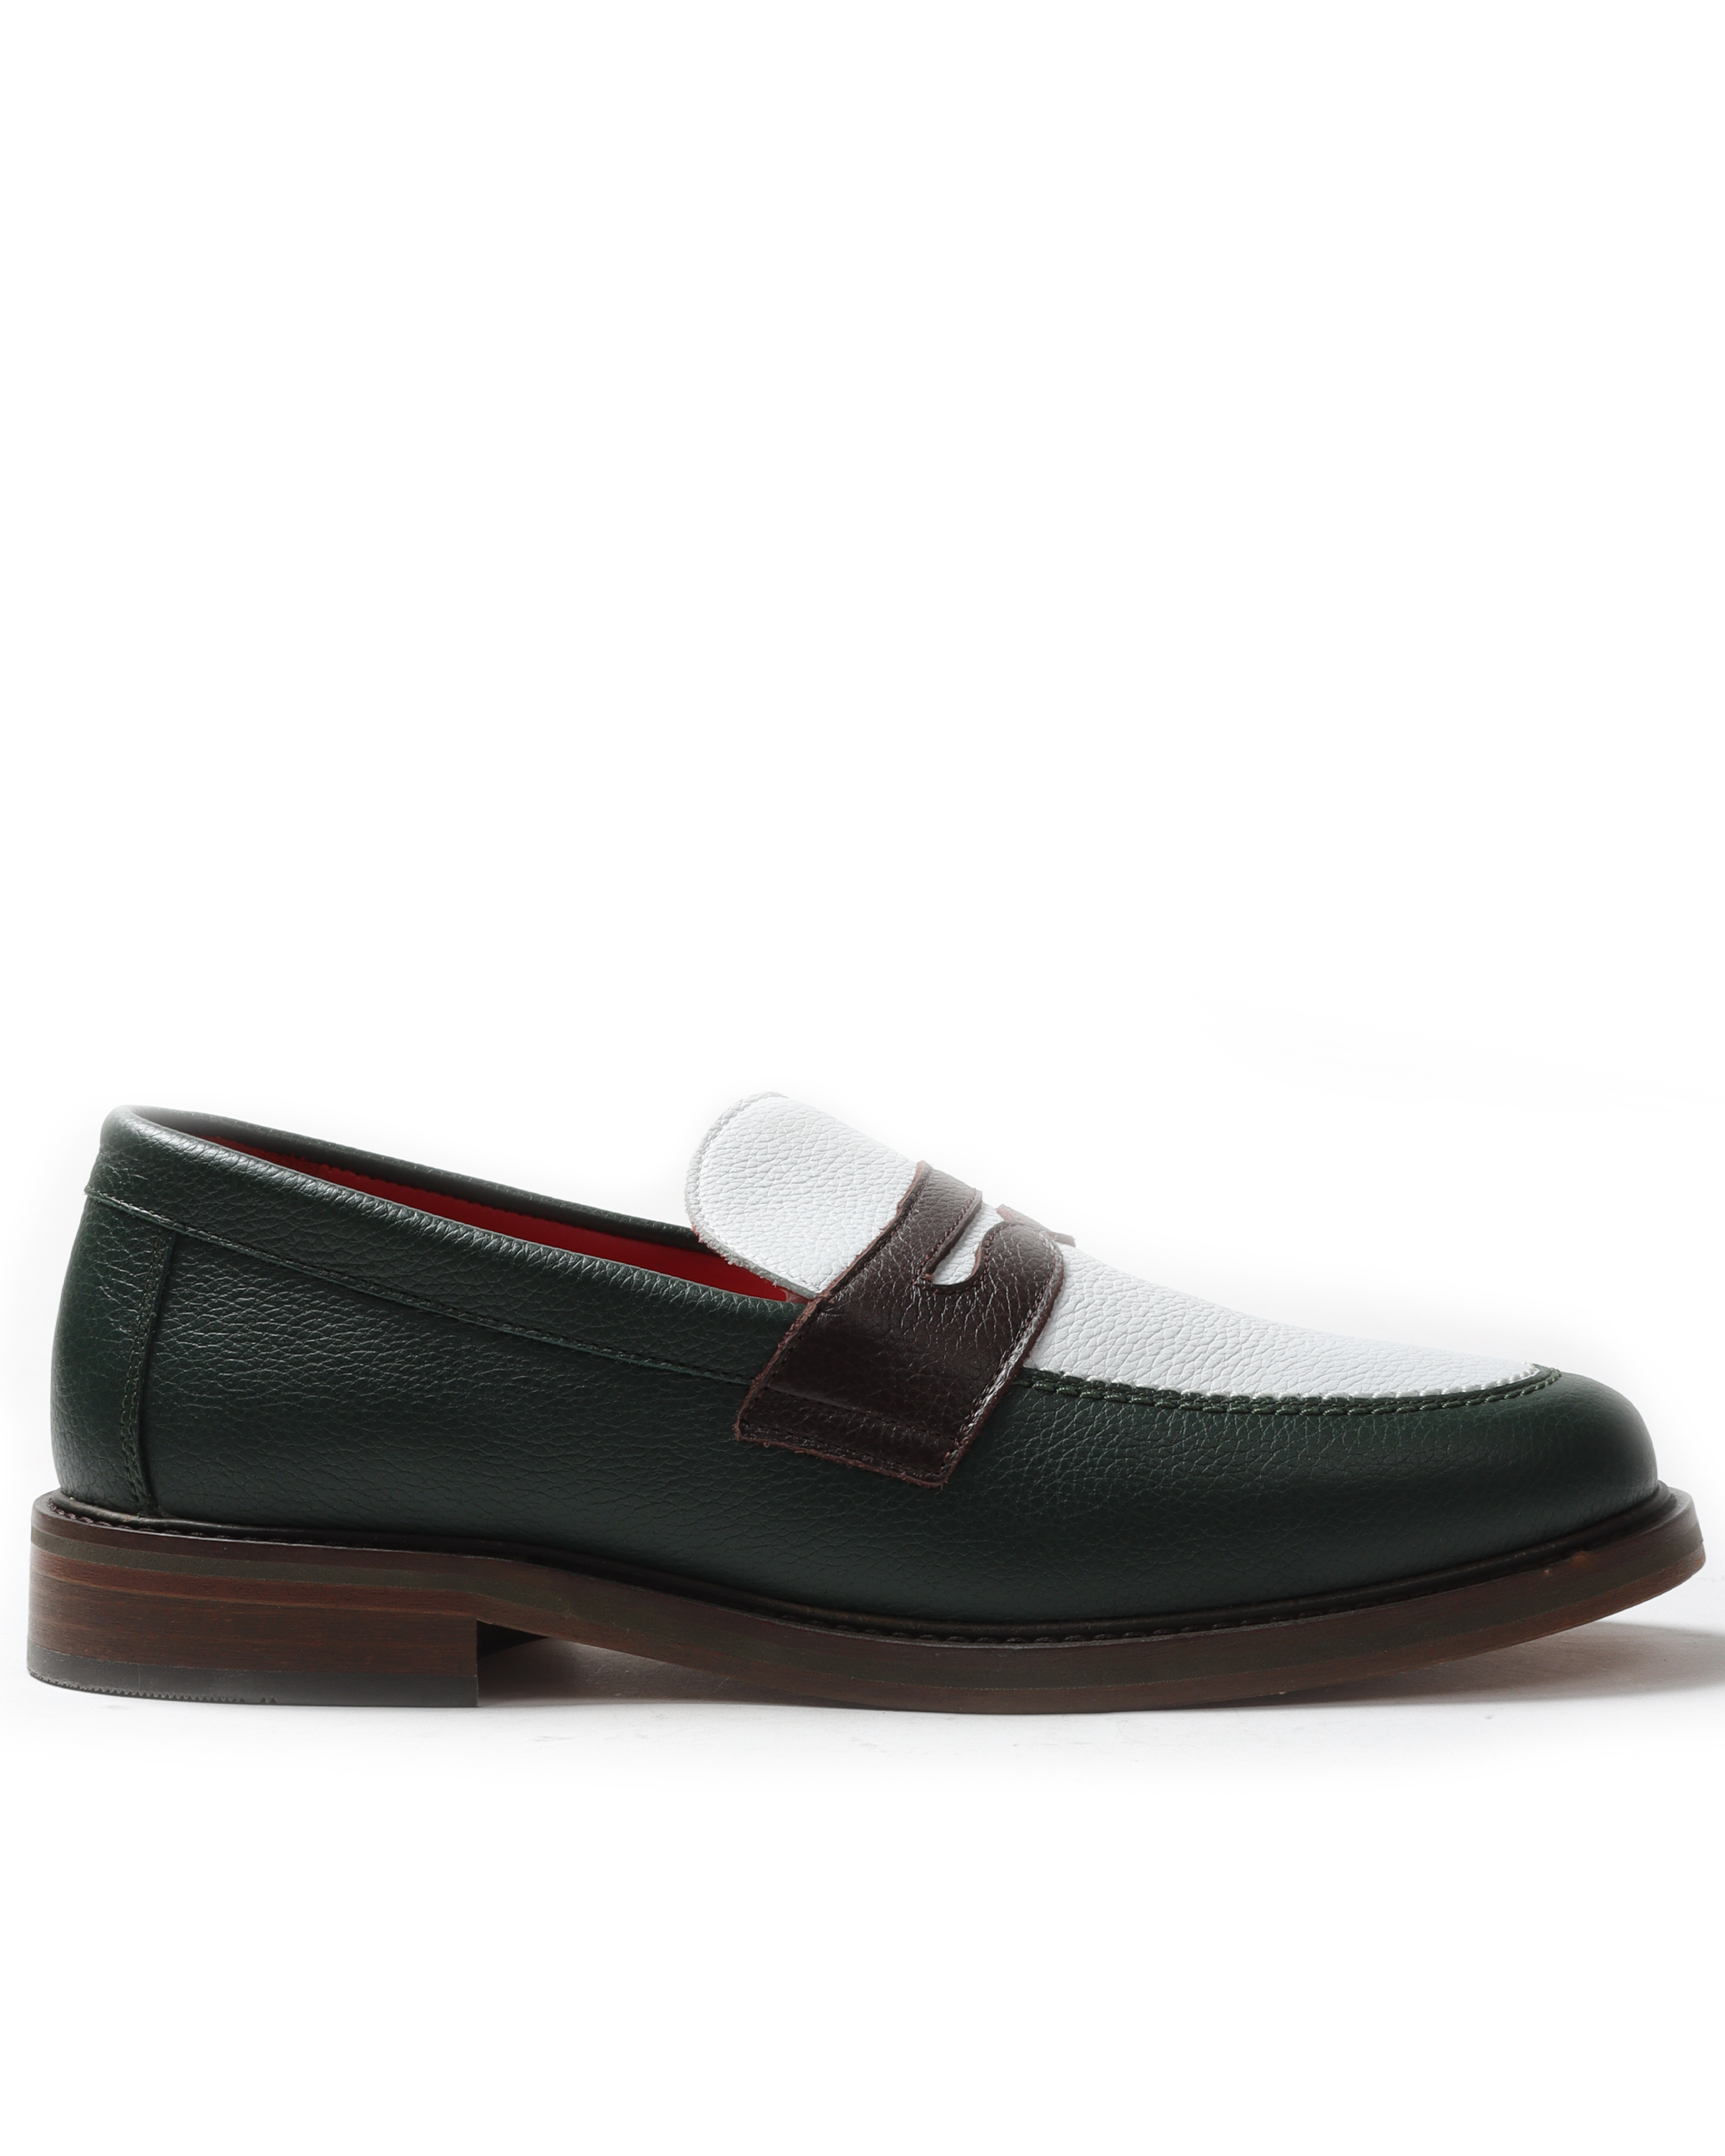 Aime Leon Dore Penny Loafer